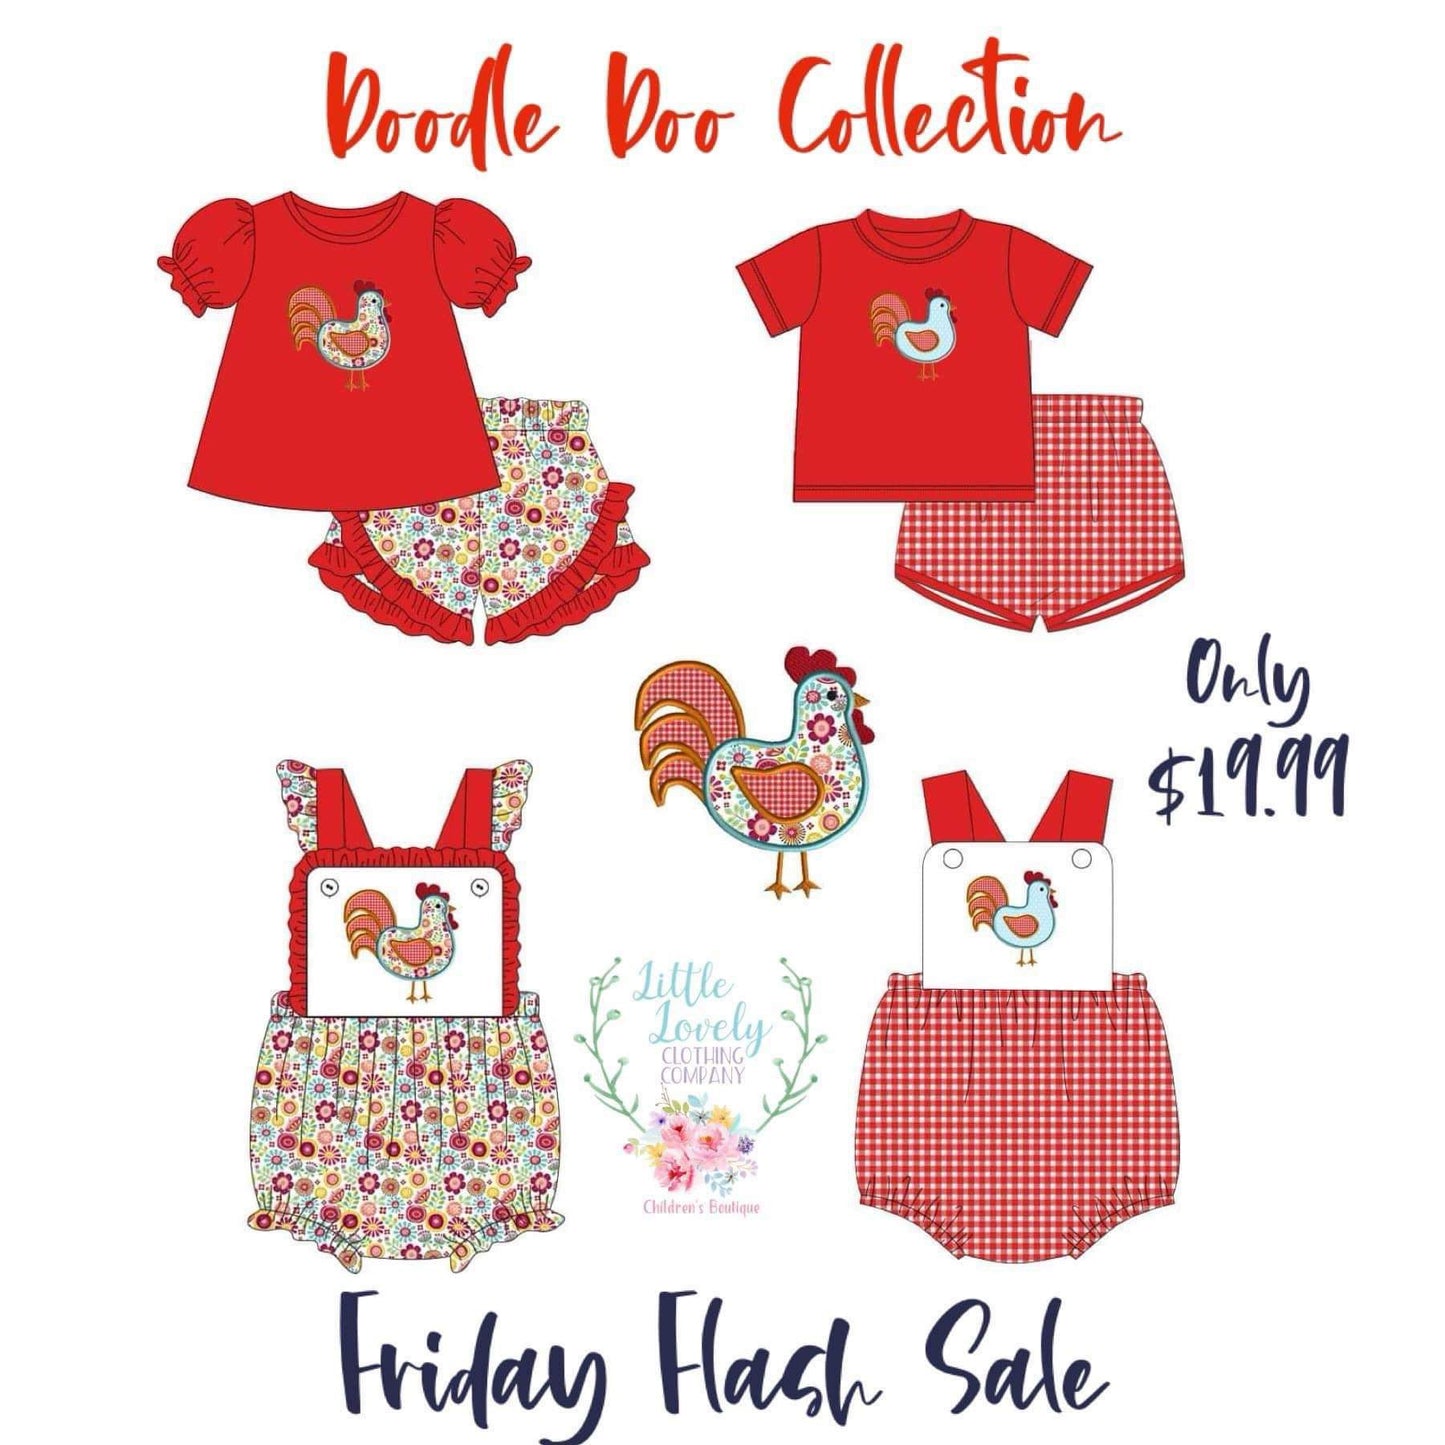 Doddle Doo Collection Pre-Sale, ETA June to LLCCO, then to Customers